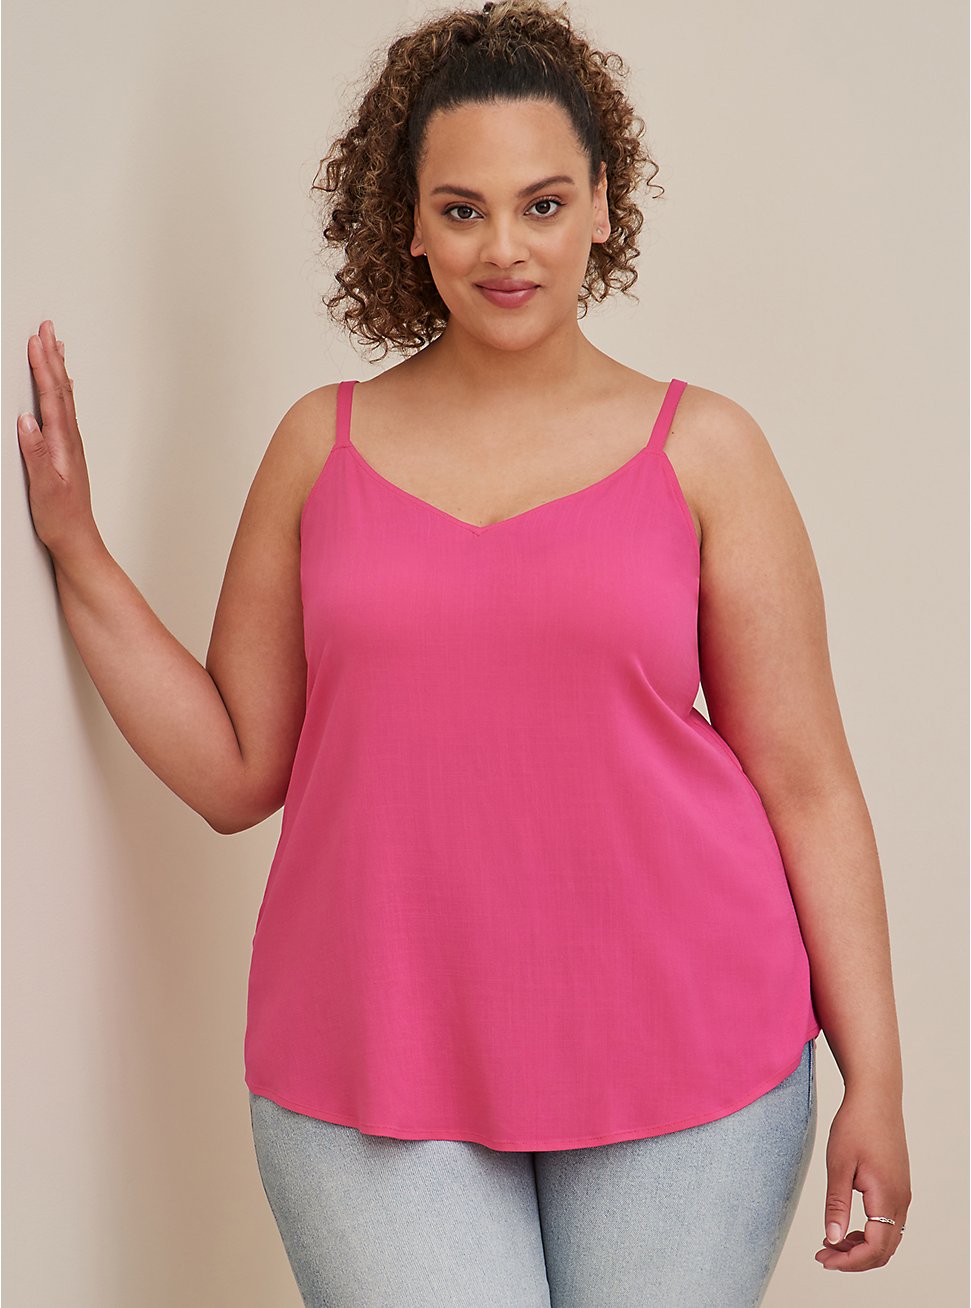 Plus Size Ava Cami - Textured Stretch Rayon Neon Pink, PINK GLO, hi-res